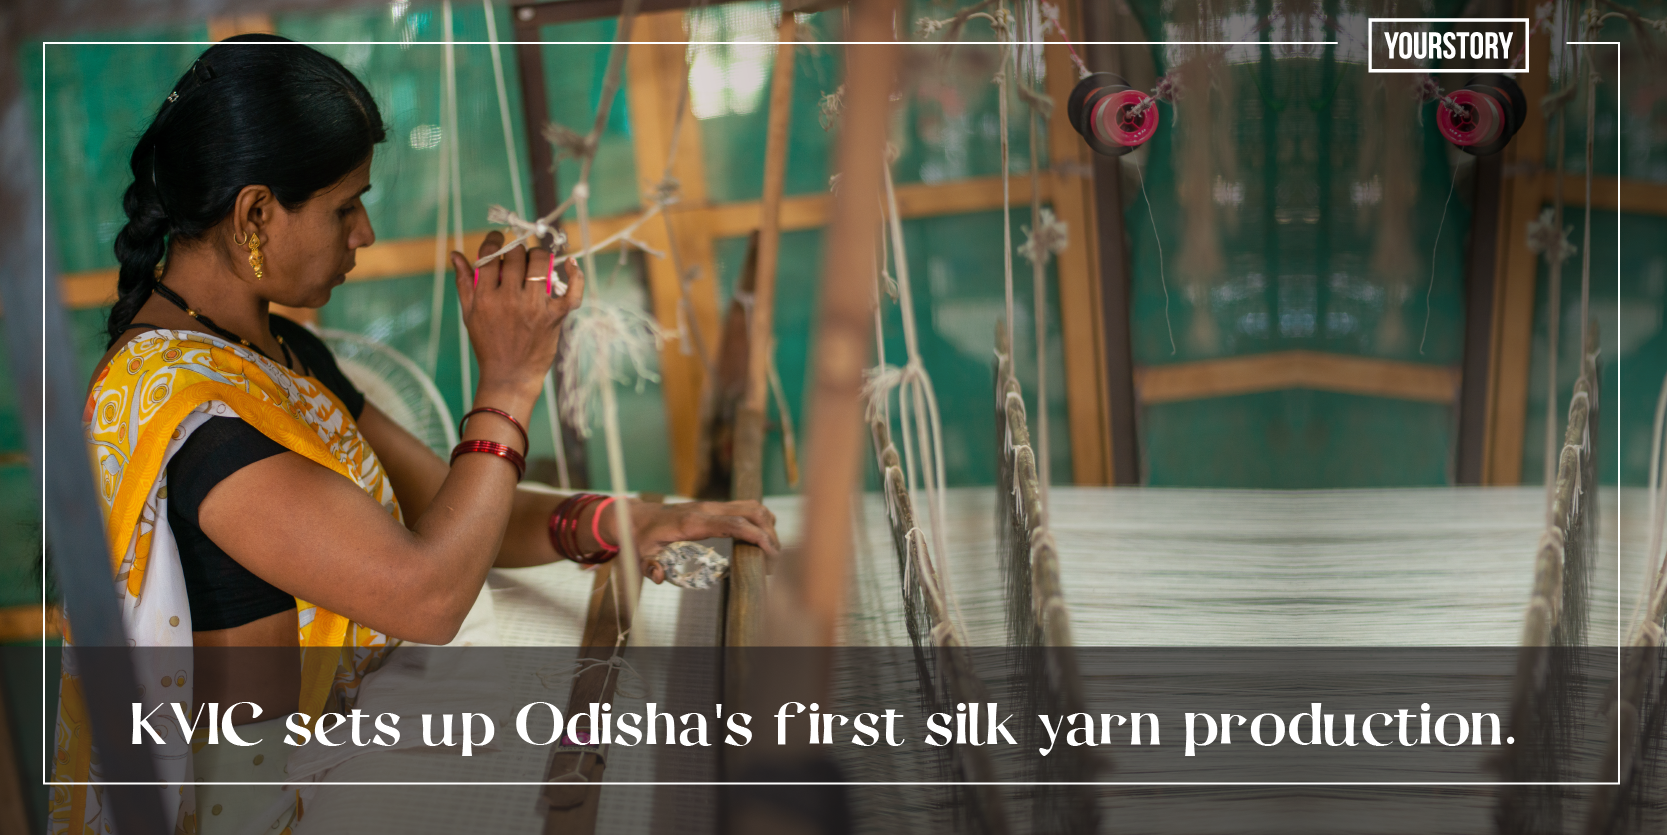 KVIC sets up Tussar silk yarn production centre in Odisha to boost local industry, create employment